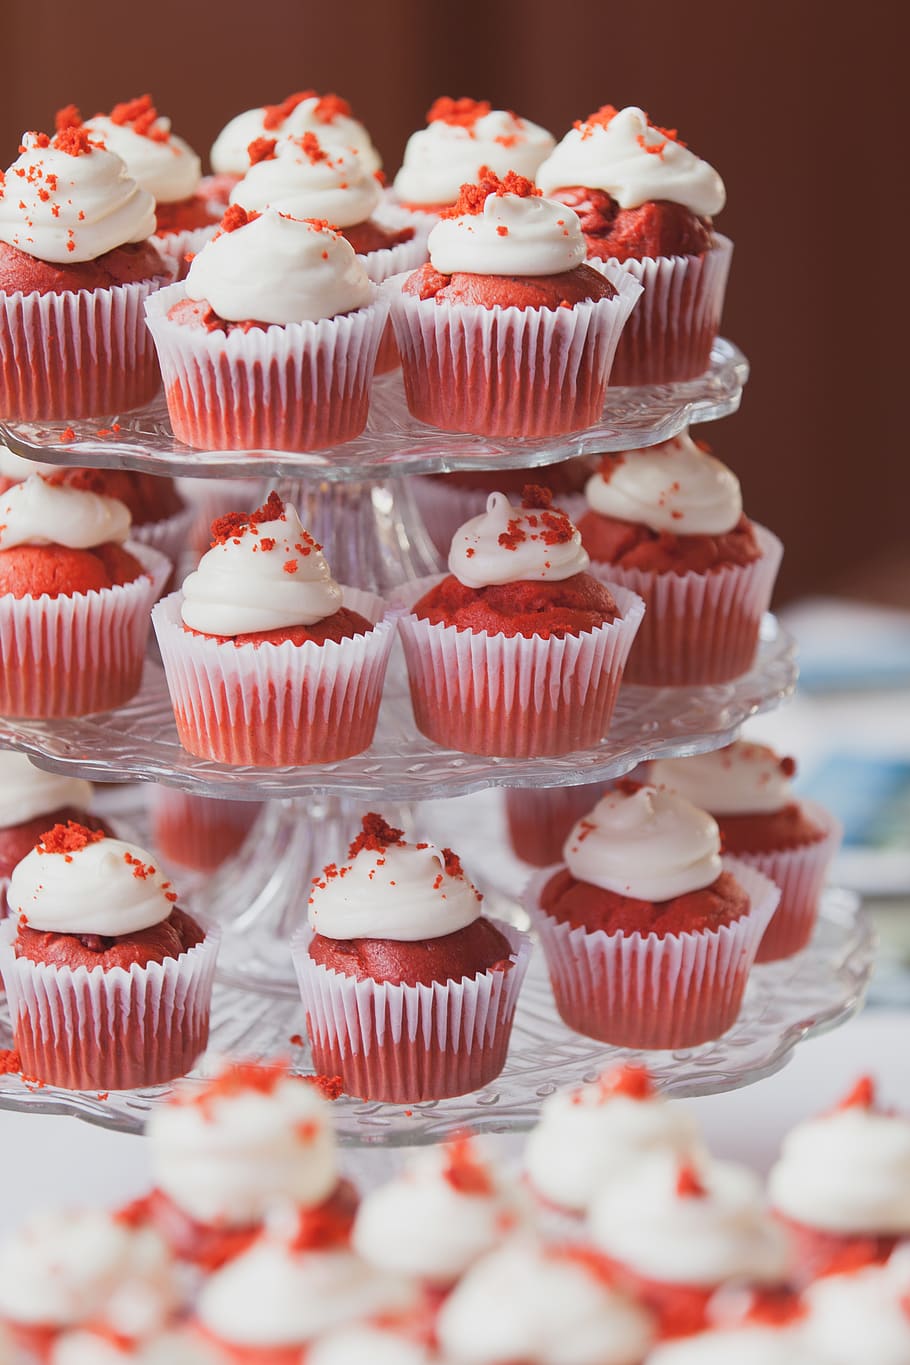 A tray of cupcakes with white frosting and red sprinkles - Cake, cupcakes